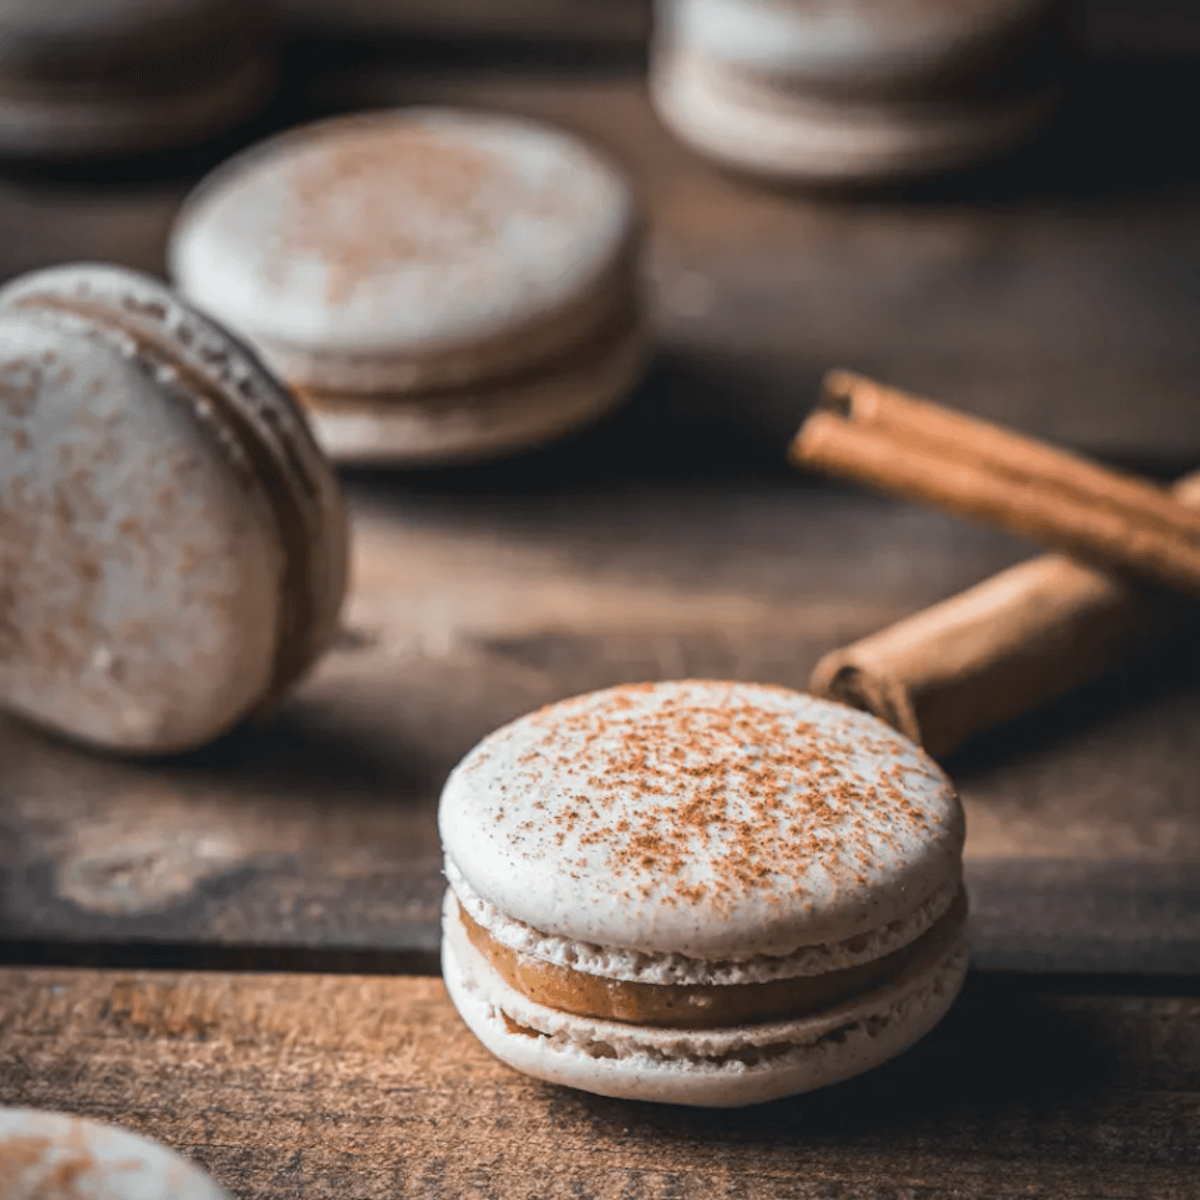 Snickerdoodle macarons on a table with cinnamon sticks.